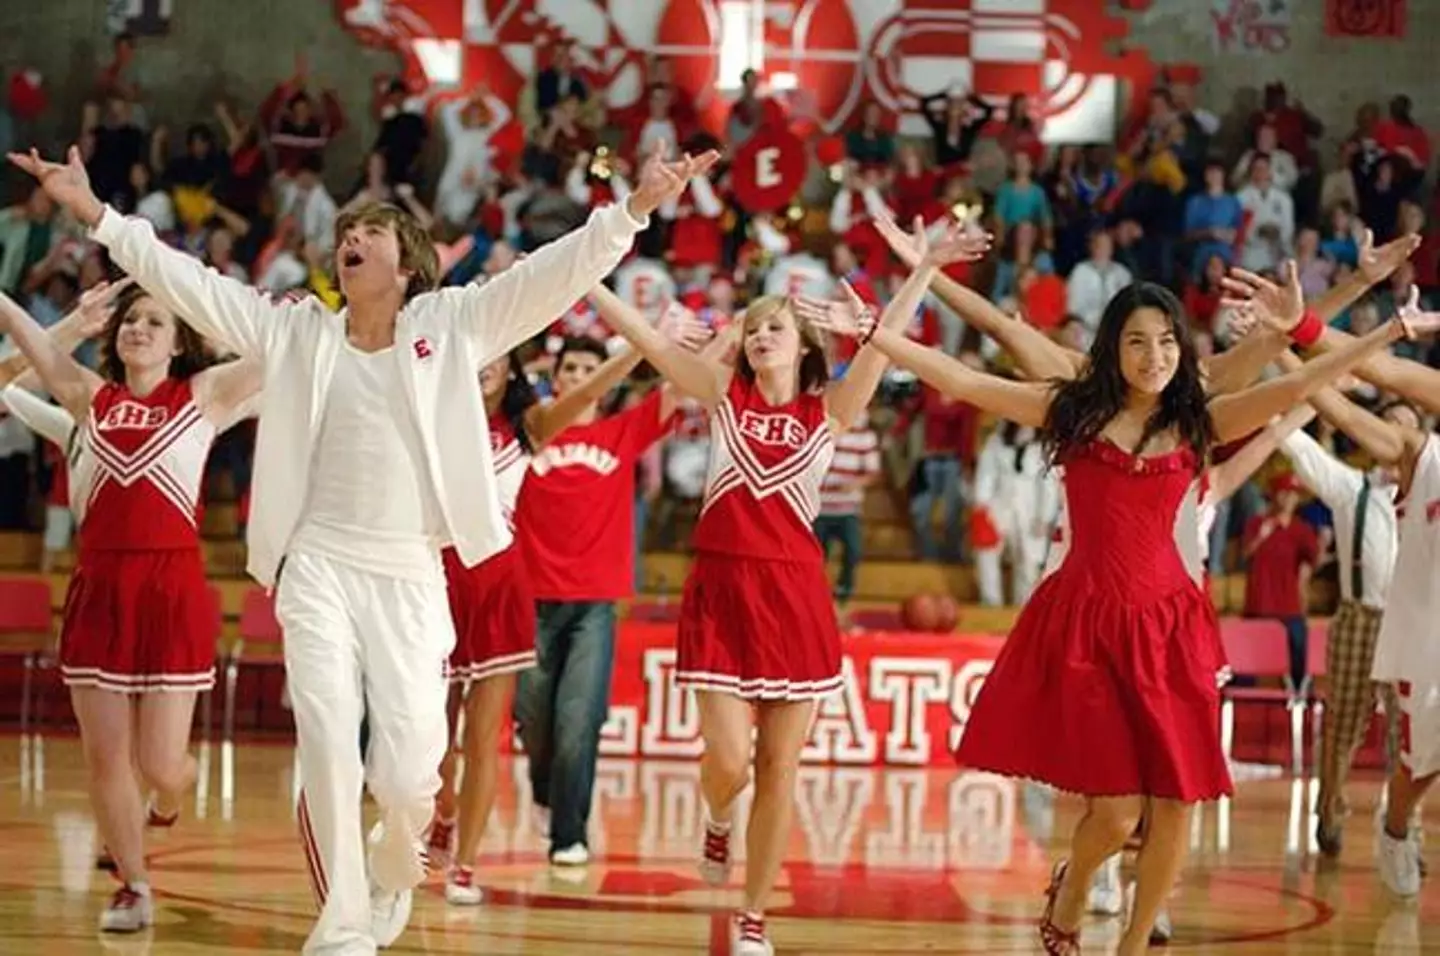 It looks like Zac Efron is keen for a HSM reunion.